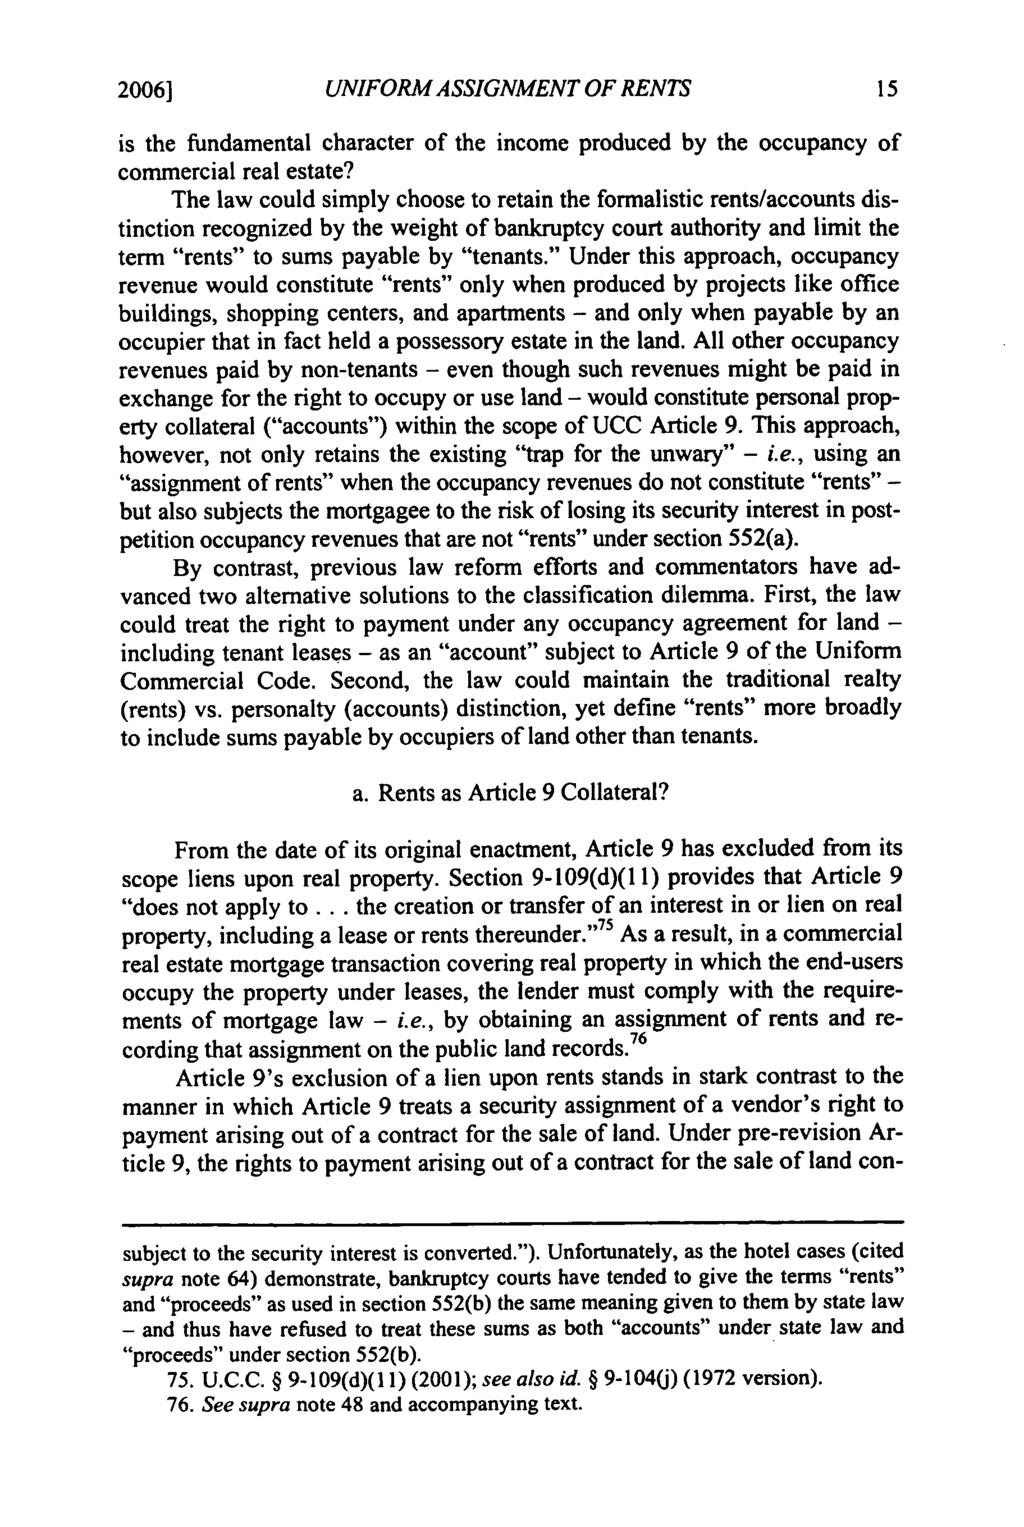 2006] Freyermuth: Freyermuth: Modernizing Security in Rents UNIFORM ASSIGNMENT OF RENTS is the fundamental character of the income produced by the occupancy of commercial real estate?